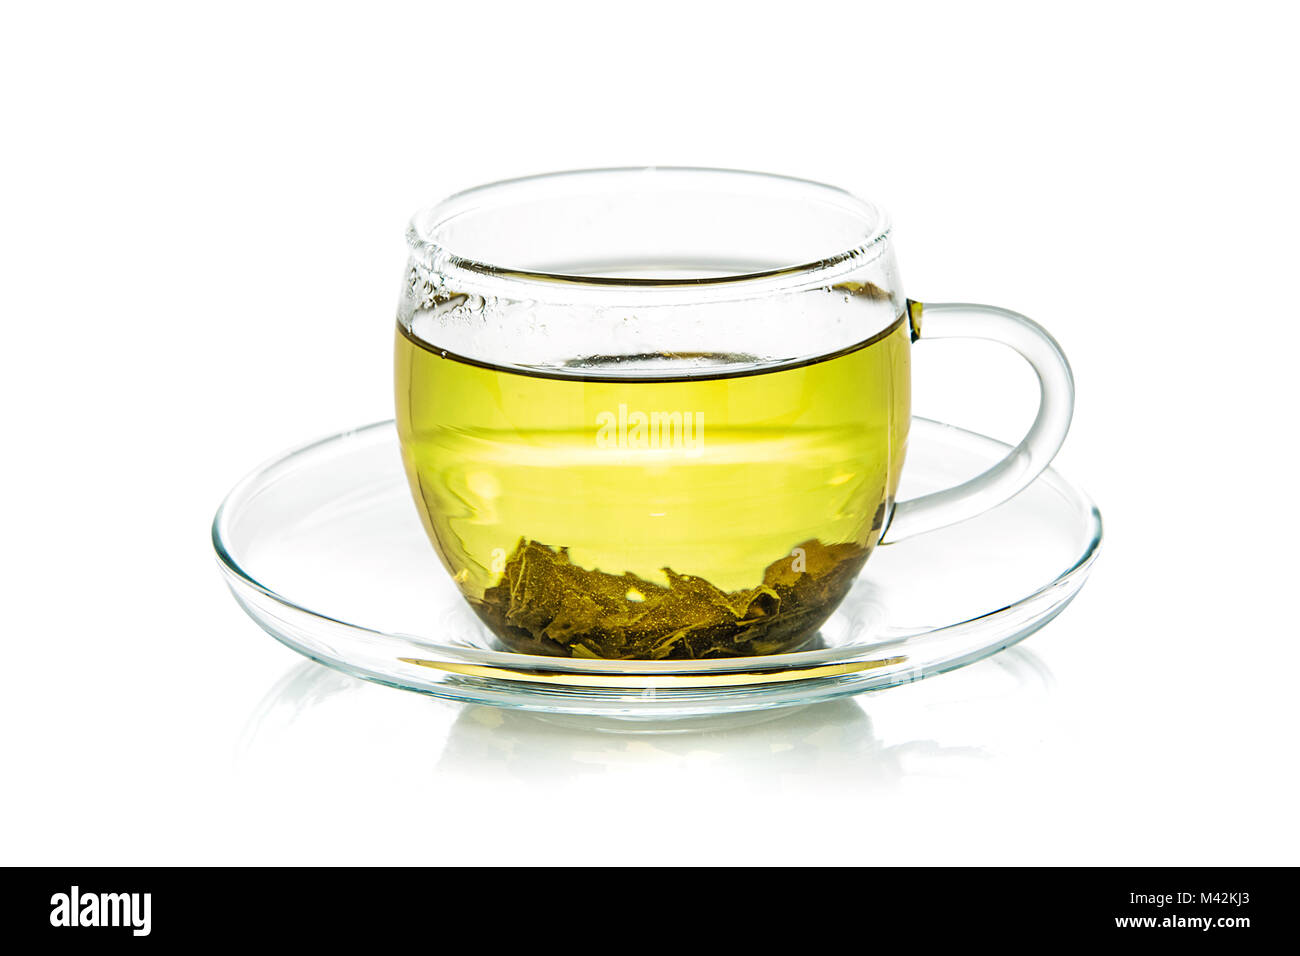 https://c8.alamy.com/comp/M42KJ3/transparent-glass-cup-of-natural-green-tea-isolated-on-a-white-background-M42KJ3.jpg